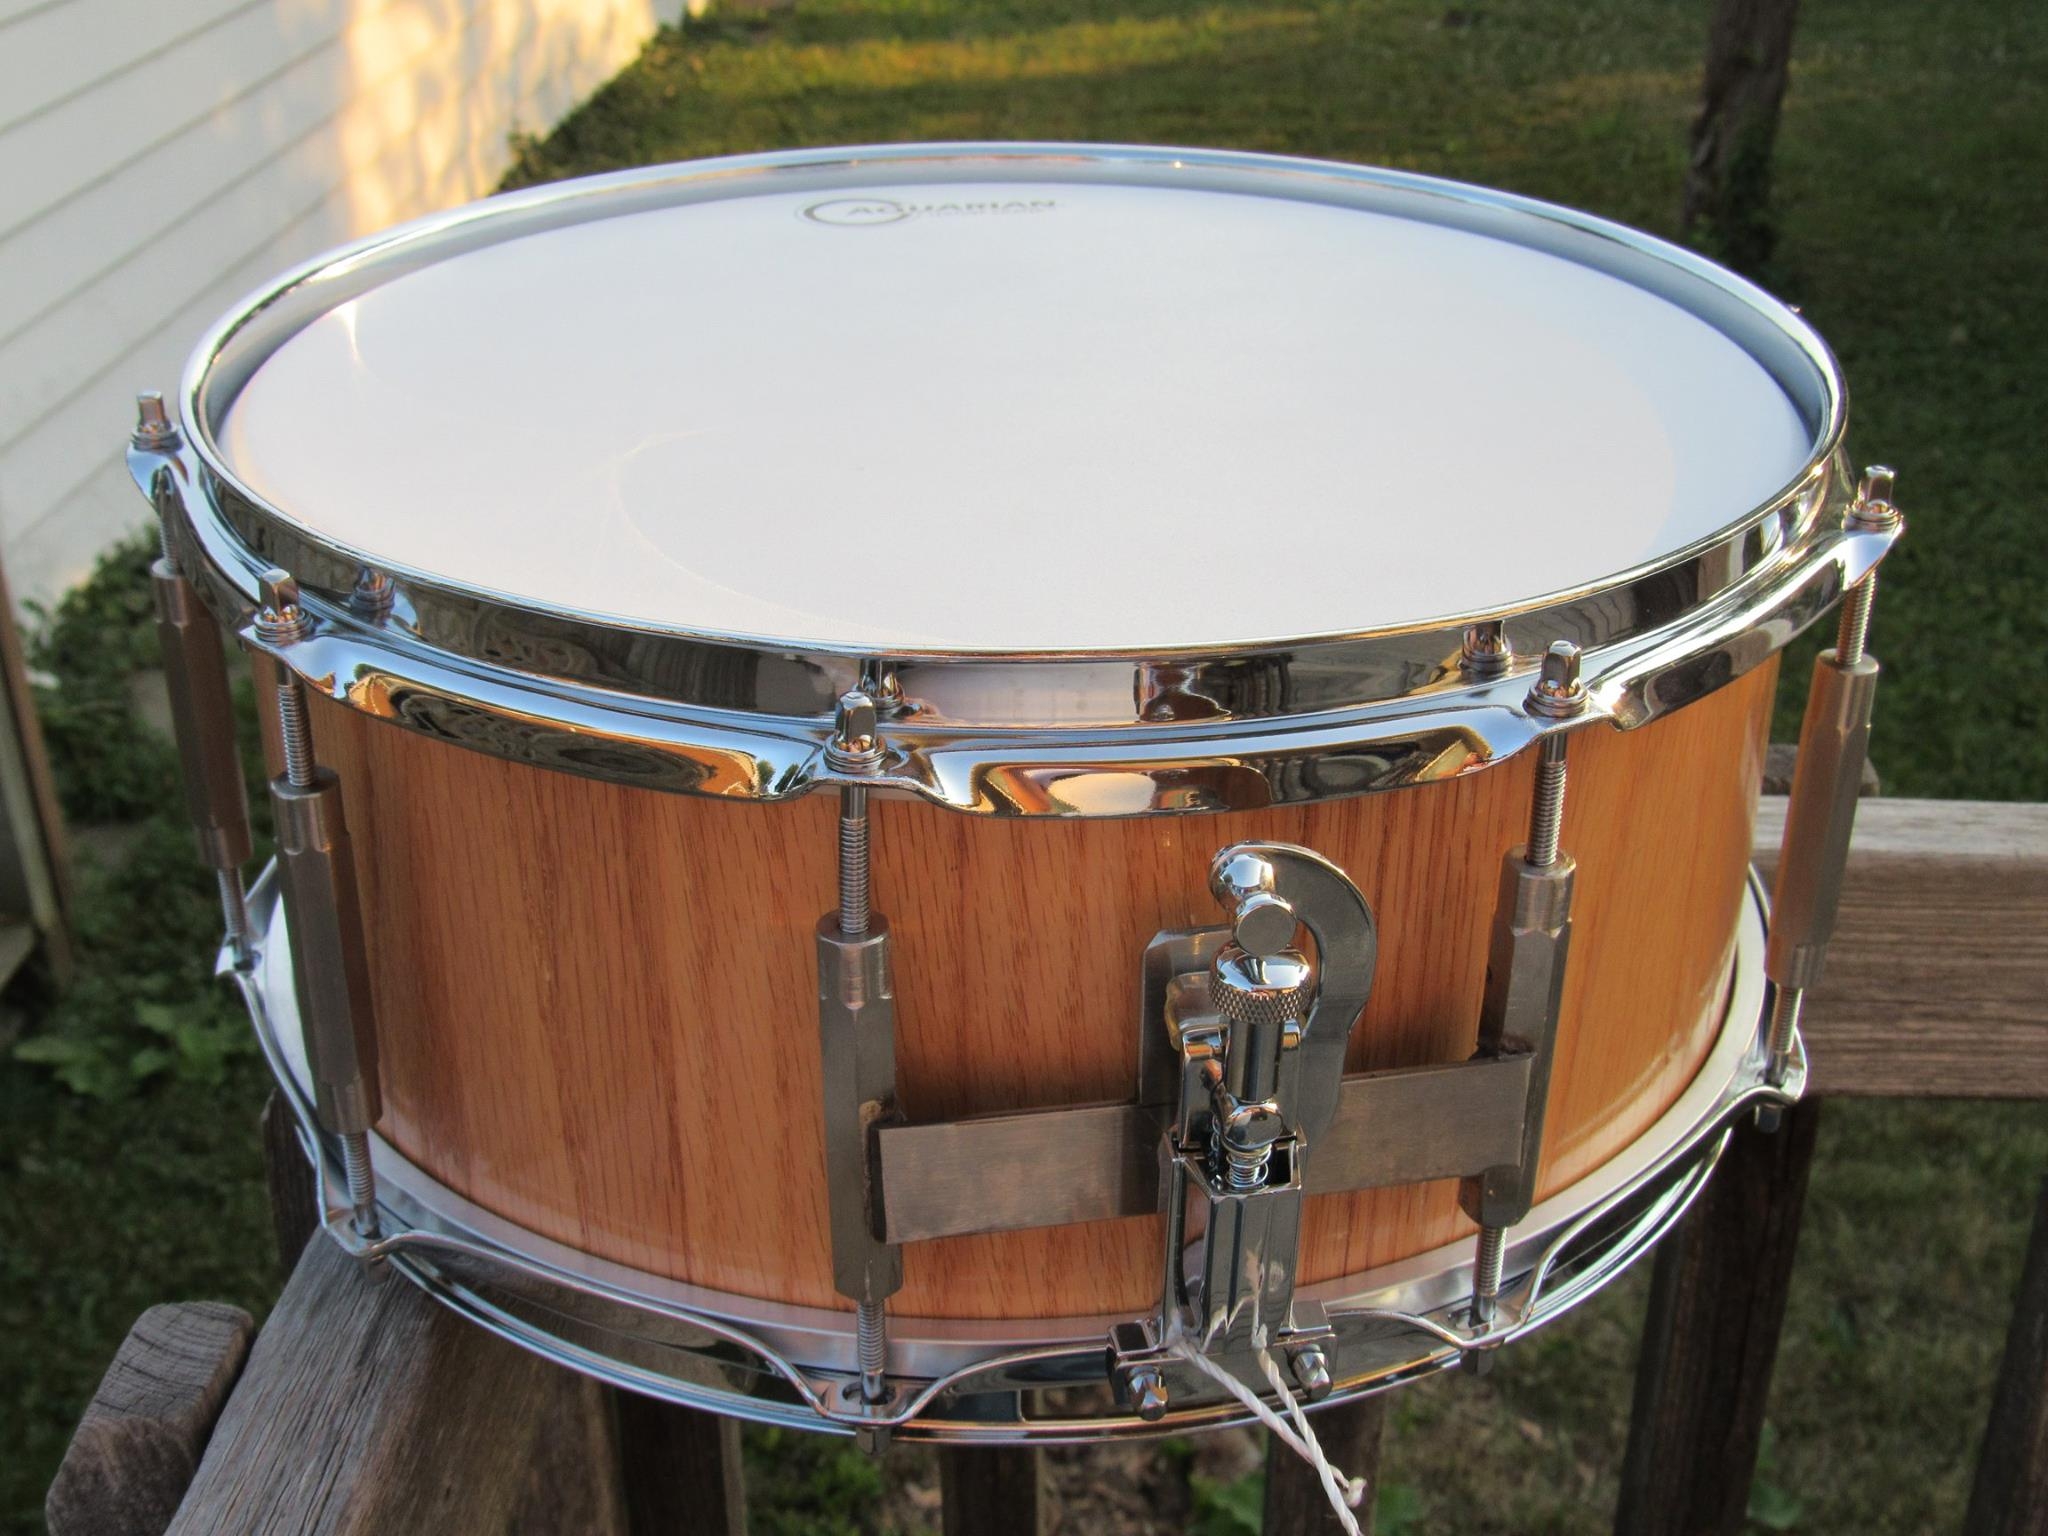 Great sounding floating snare drums!